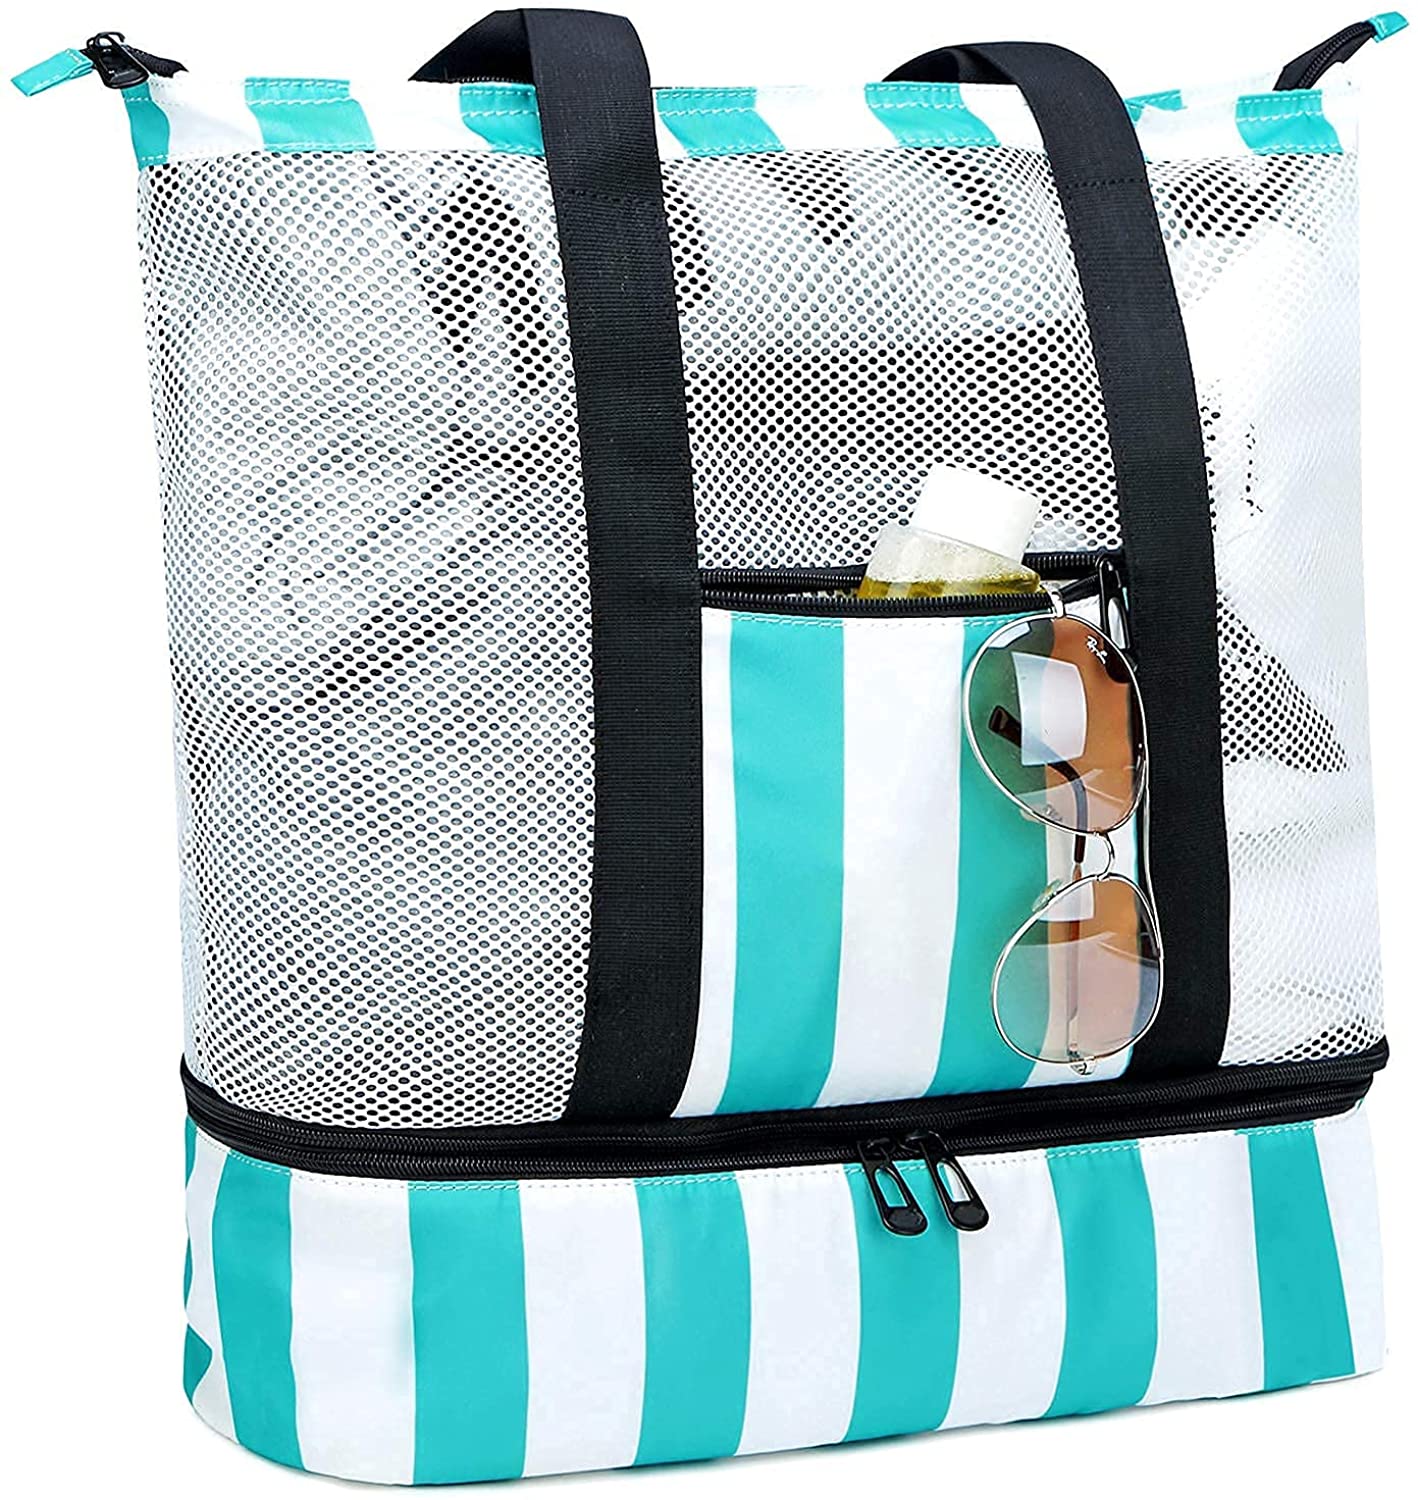 Durable Beach Totes For Summer 2016 - Spotted Fashion